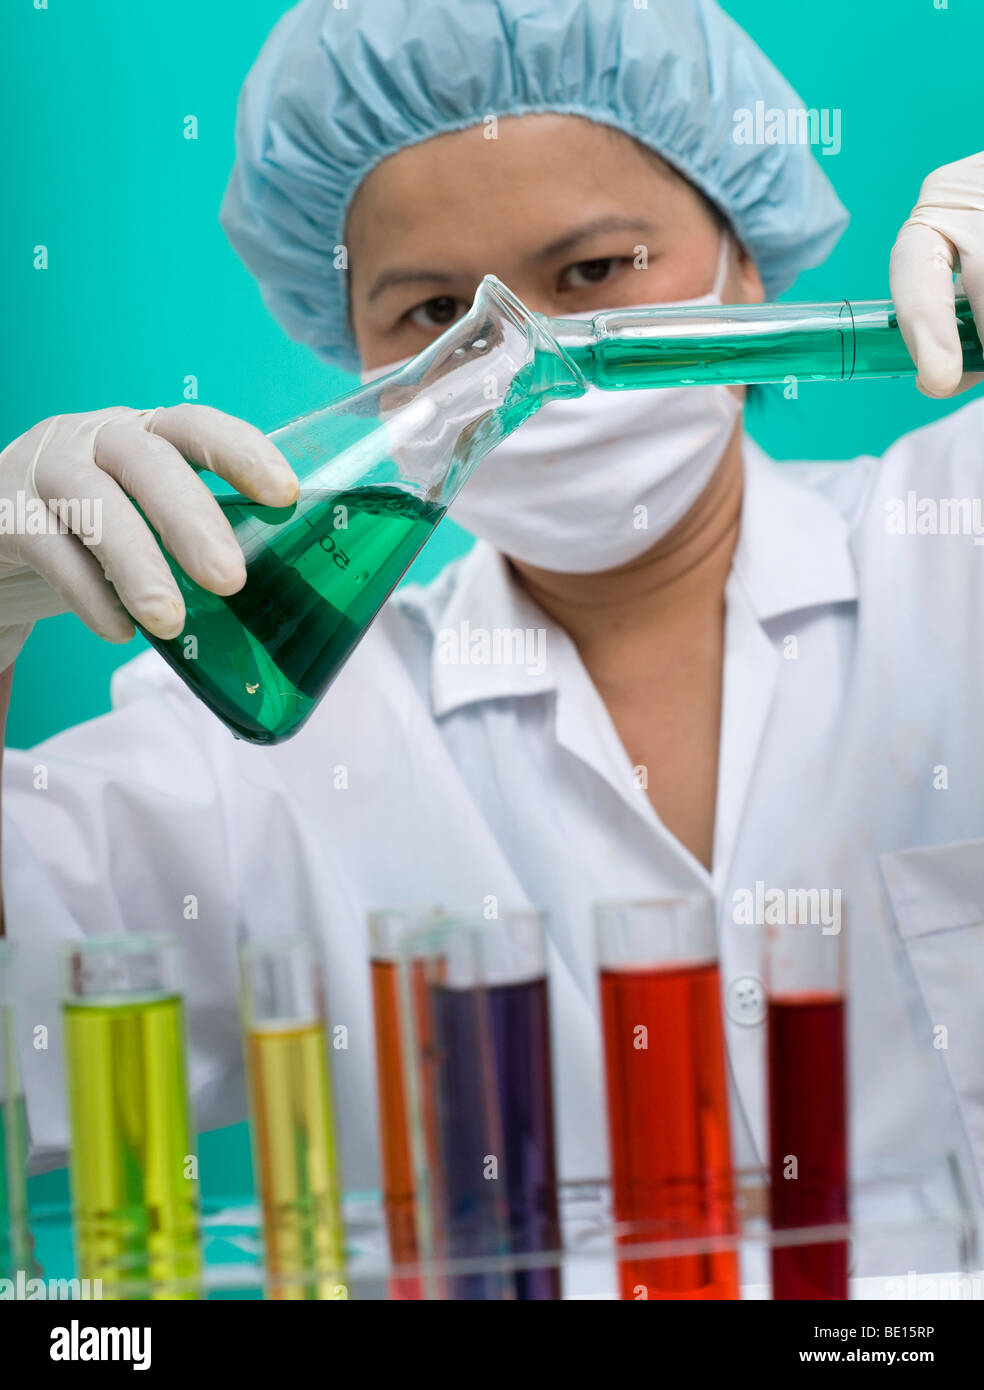 Asian woman working in a medical lab Stock Photo